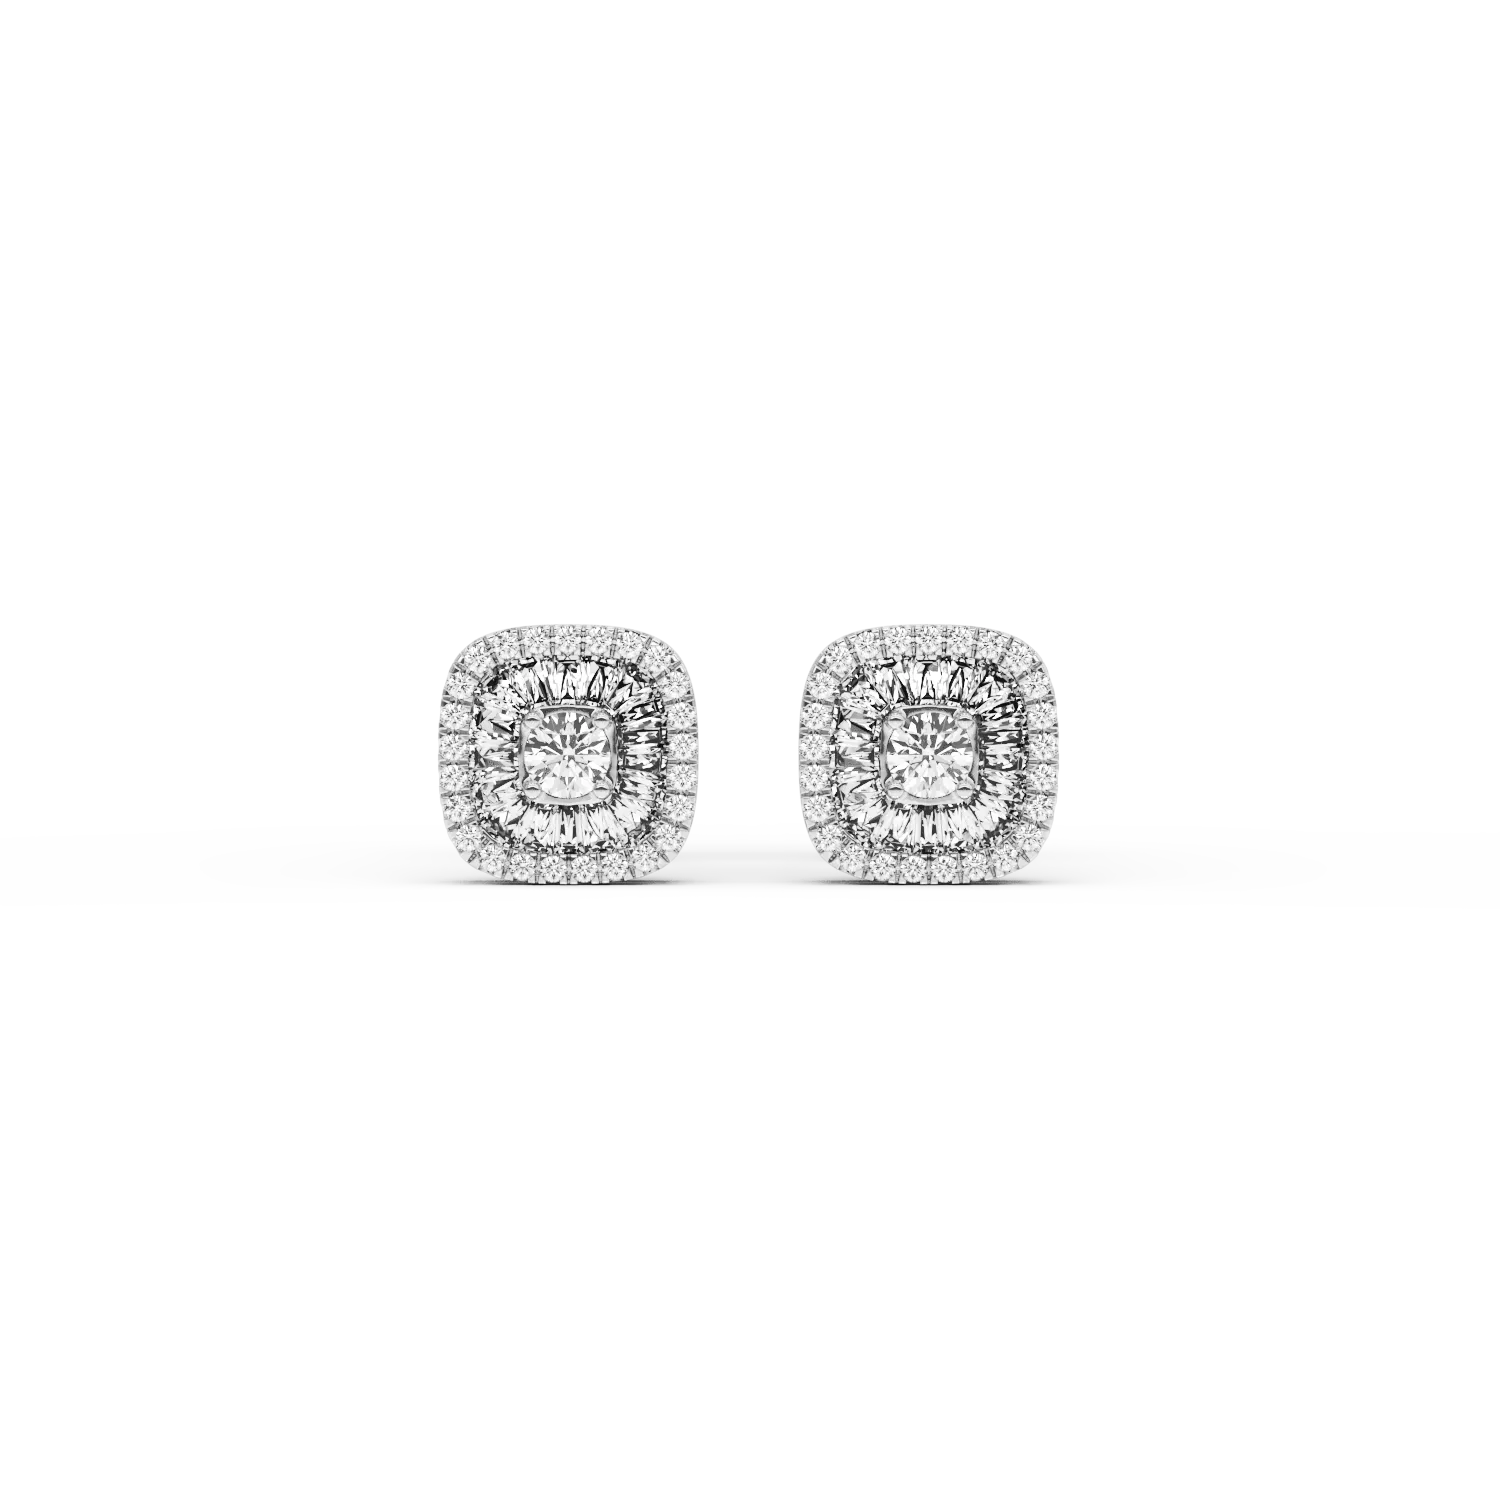 18K white gold earrings with diamonds of 0.46ct